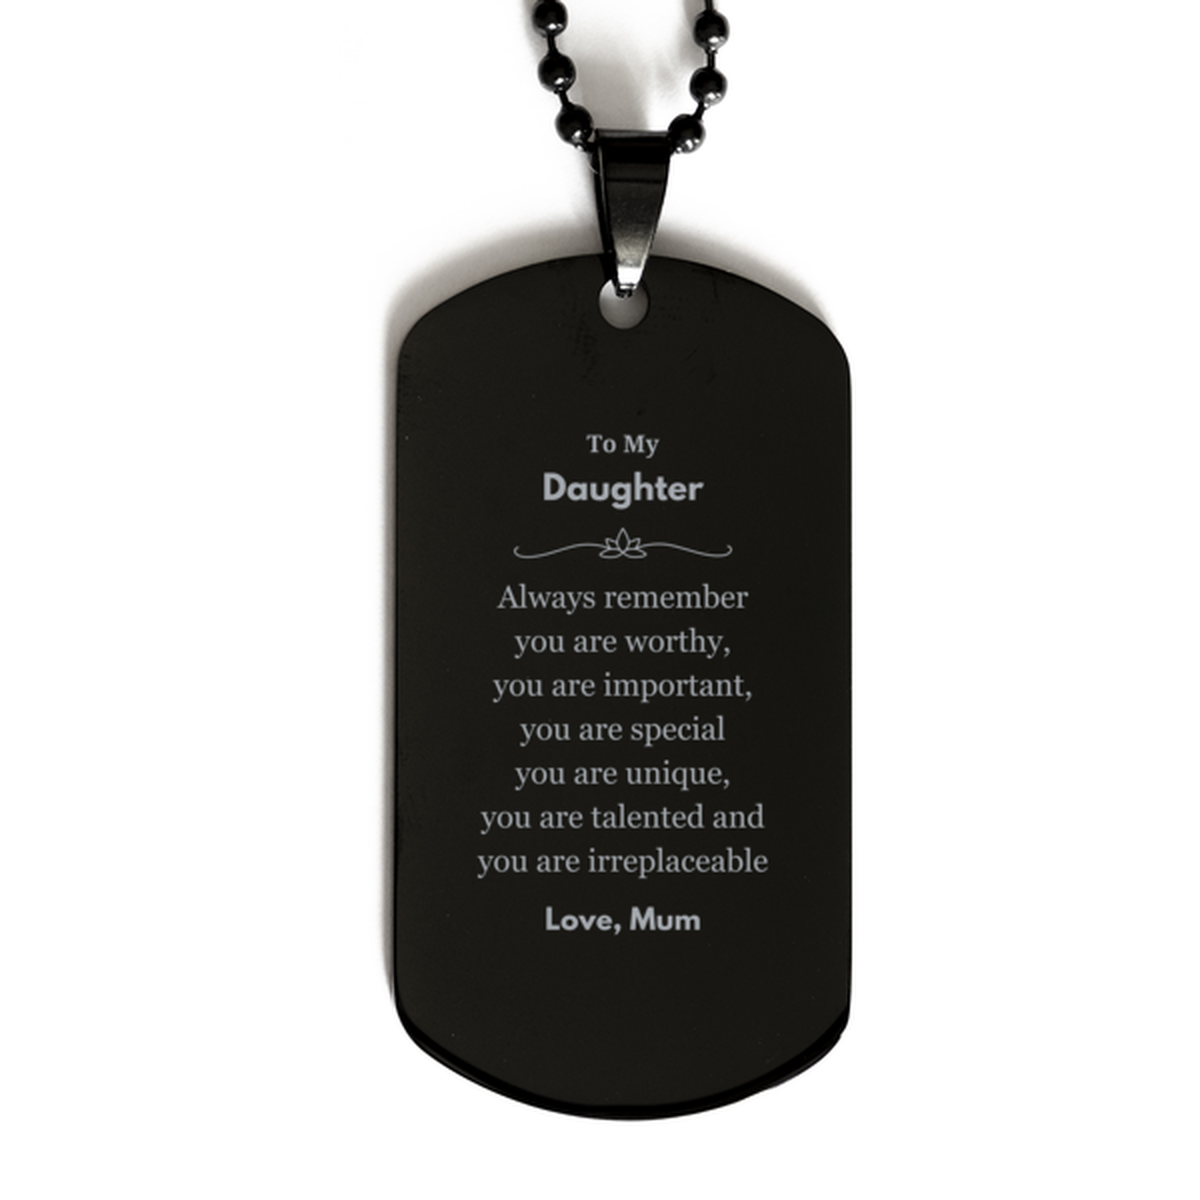 Daughter Birthday Gifts from Mum, Inspirational Black Dog Tag for Daughter Christmas Graduation Gifts for Daughter Always remember you are worthy, you are important. Love, Mum